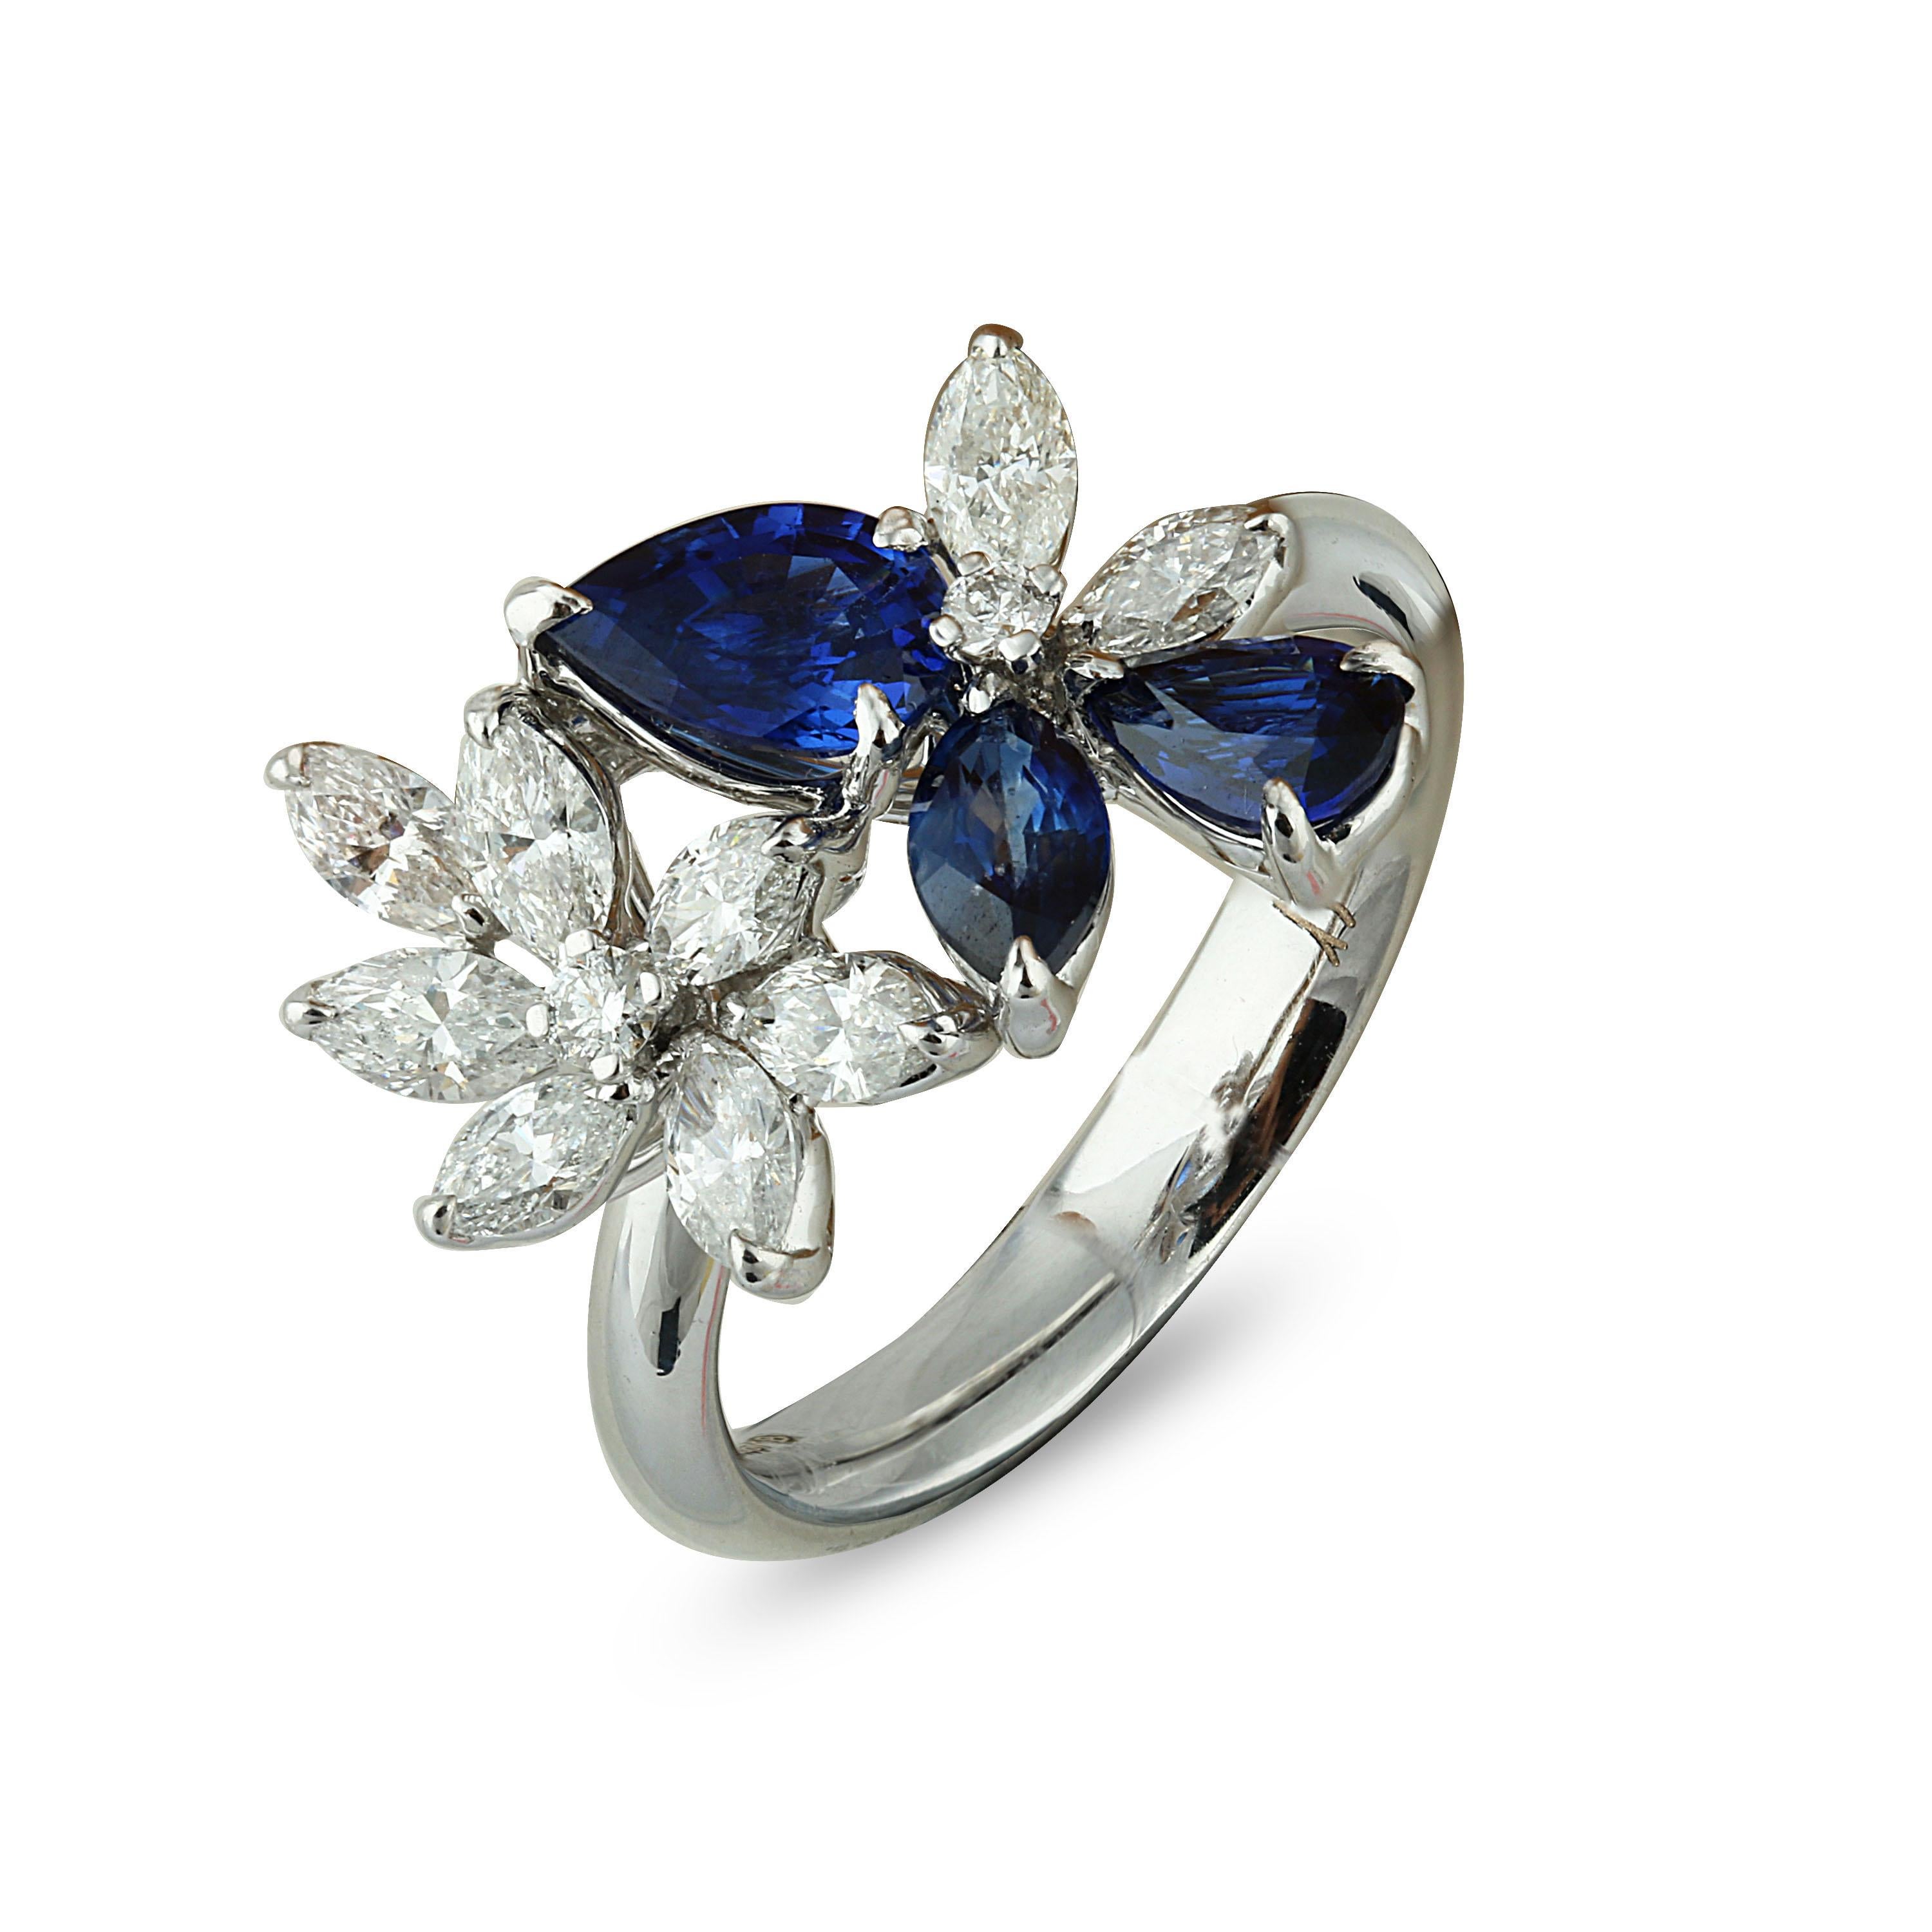 Blue Sapphire and Diamond Ring

Dual floral motifs coupled with dual coloured stones is what lends this exquisite 18K white gold ring it's charismatic flair. Crafted using pear and marquise blue sapphires, and marquise brilliant and round brilliant